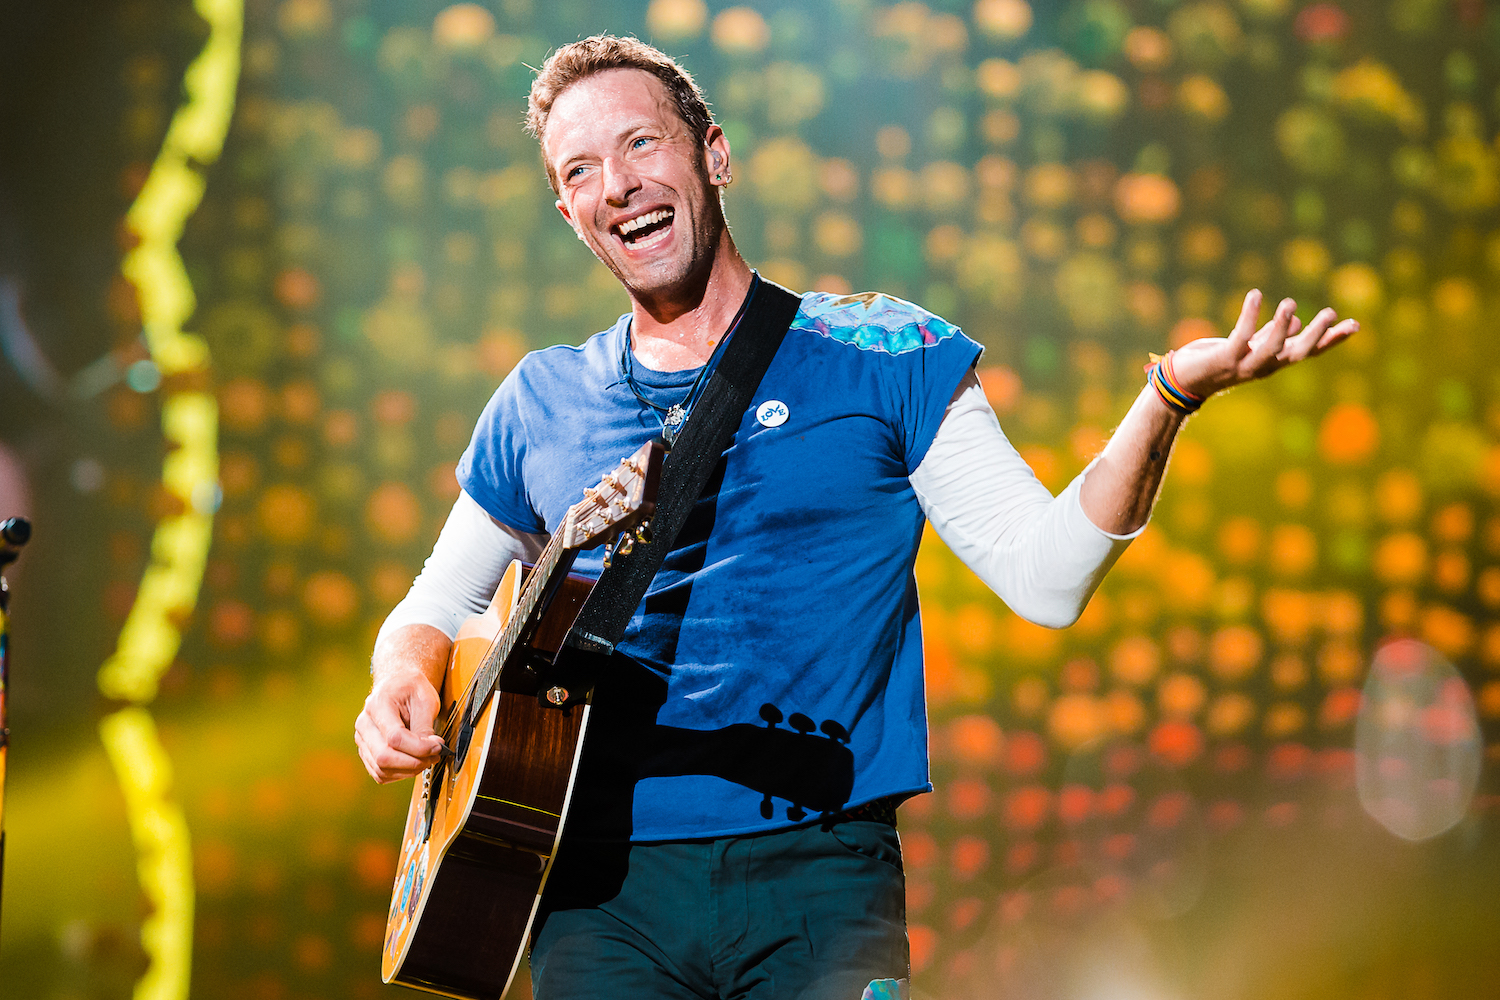 Chris Martin singer member of the band Coldplay performs live on stage